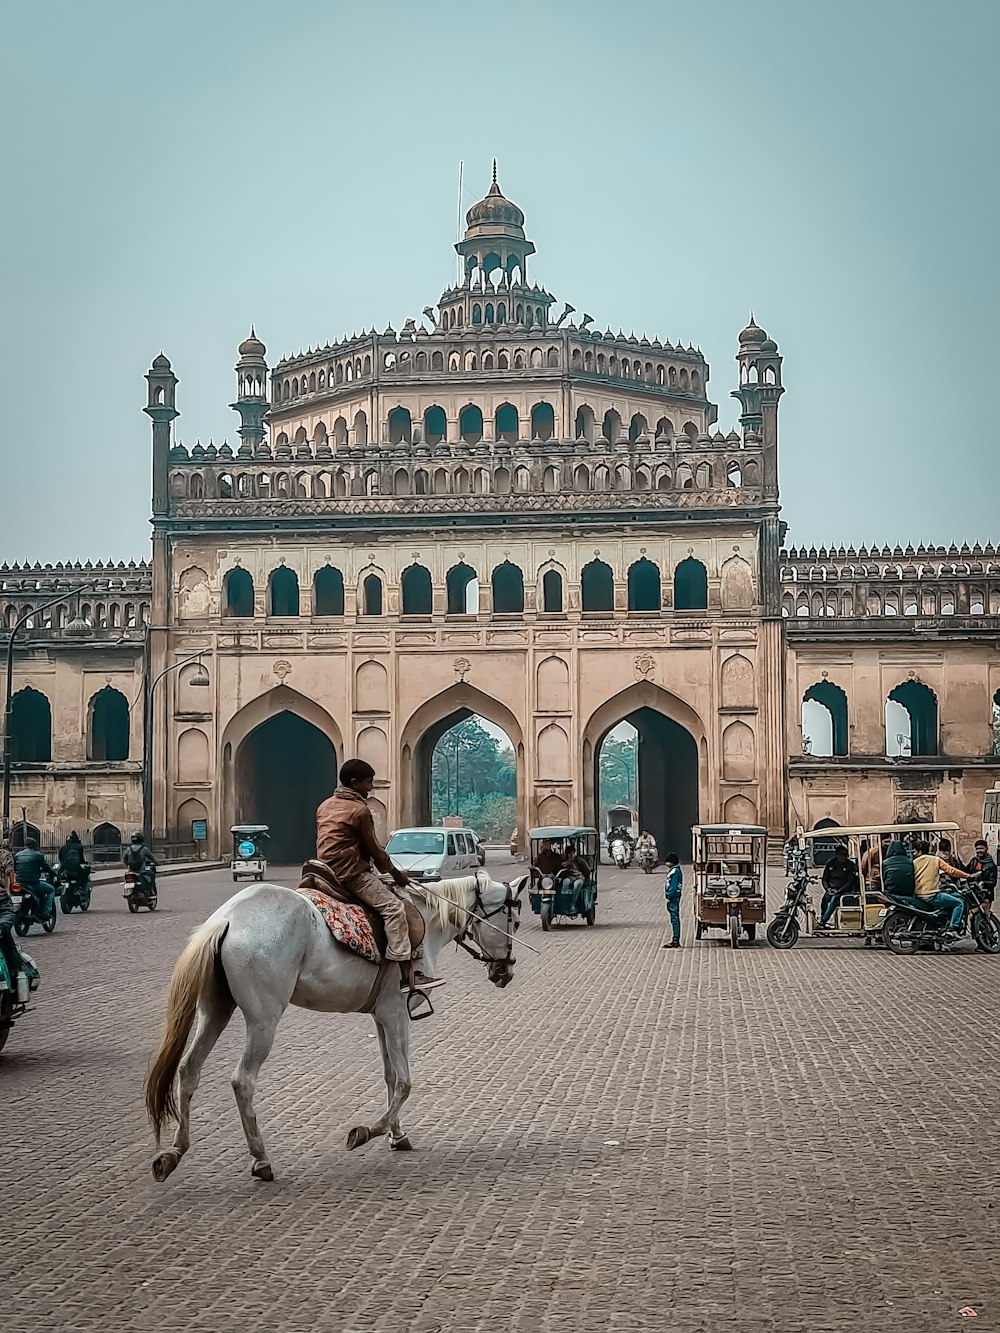 a person riding a horse in front of a large building